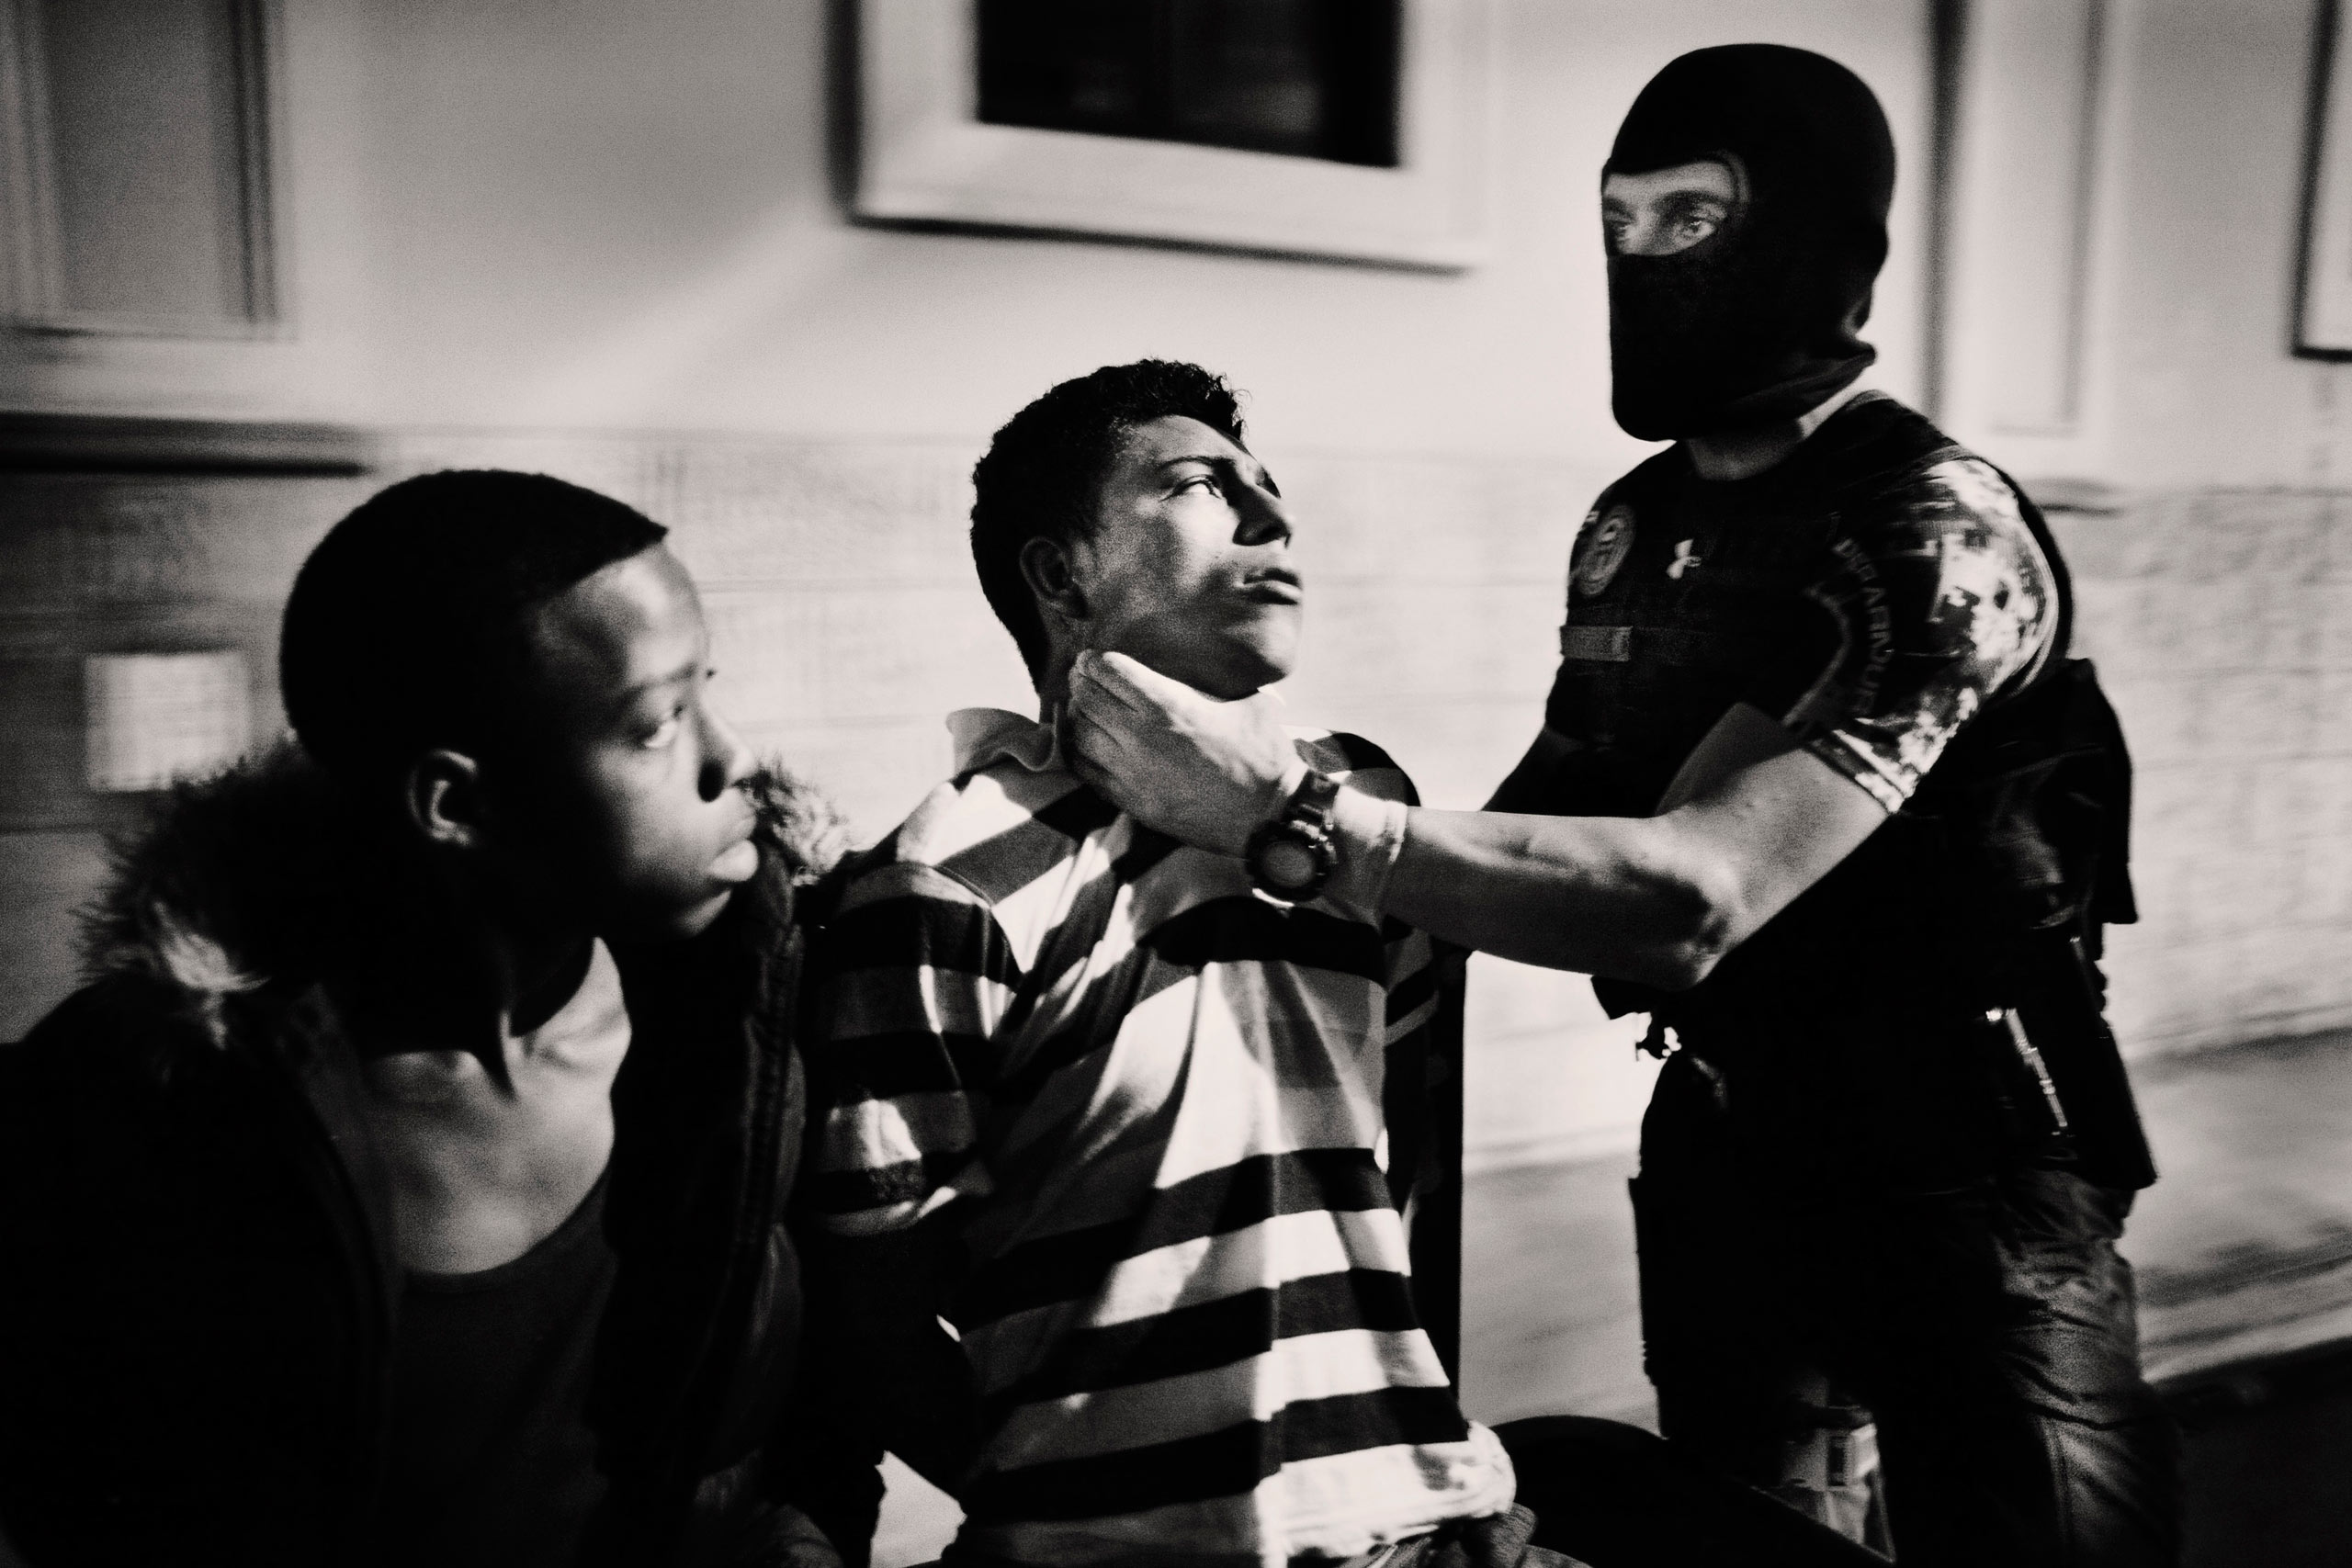 Juvenile detention Saul and Walter David Martinez Quilez marijuana in district 1 of Tegucigalpa, Honduras, for possession of marijuana and guns. In the image detainees are beaten by police.